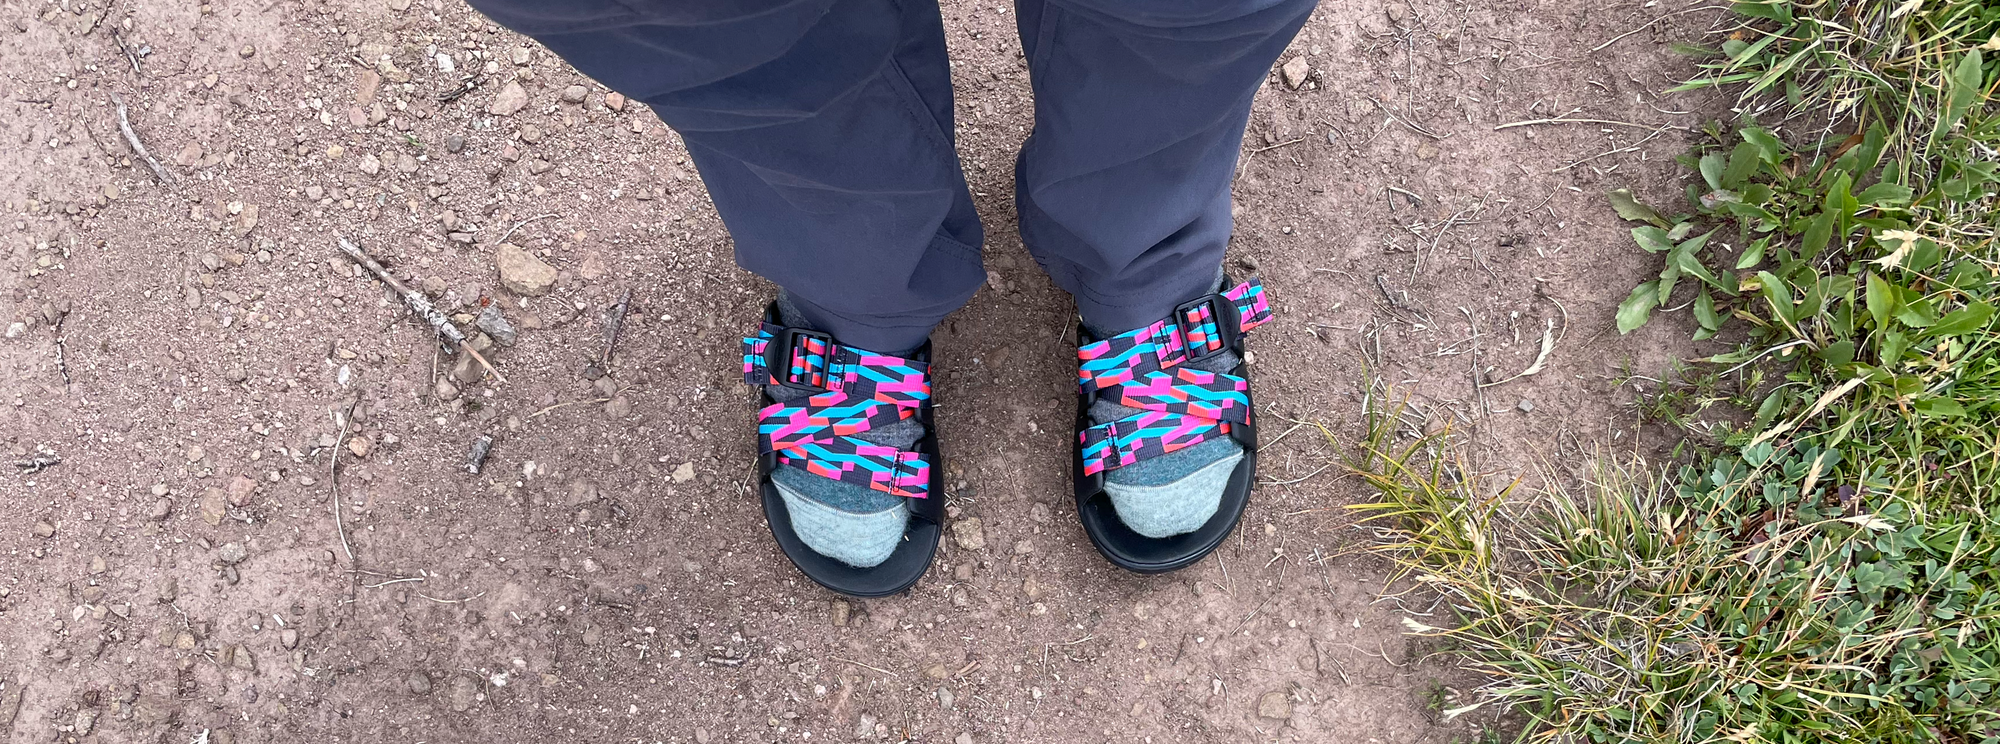 Giant hiking socks with sandals.